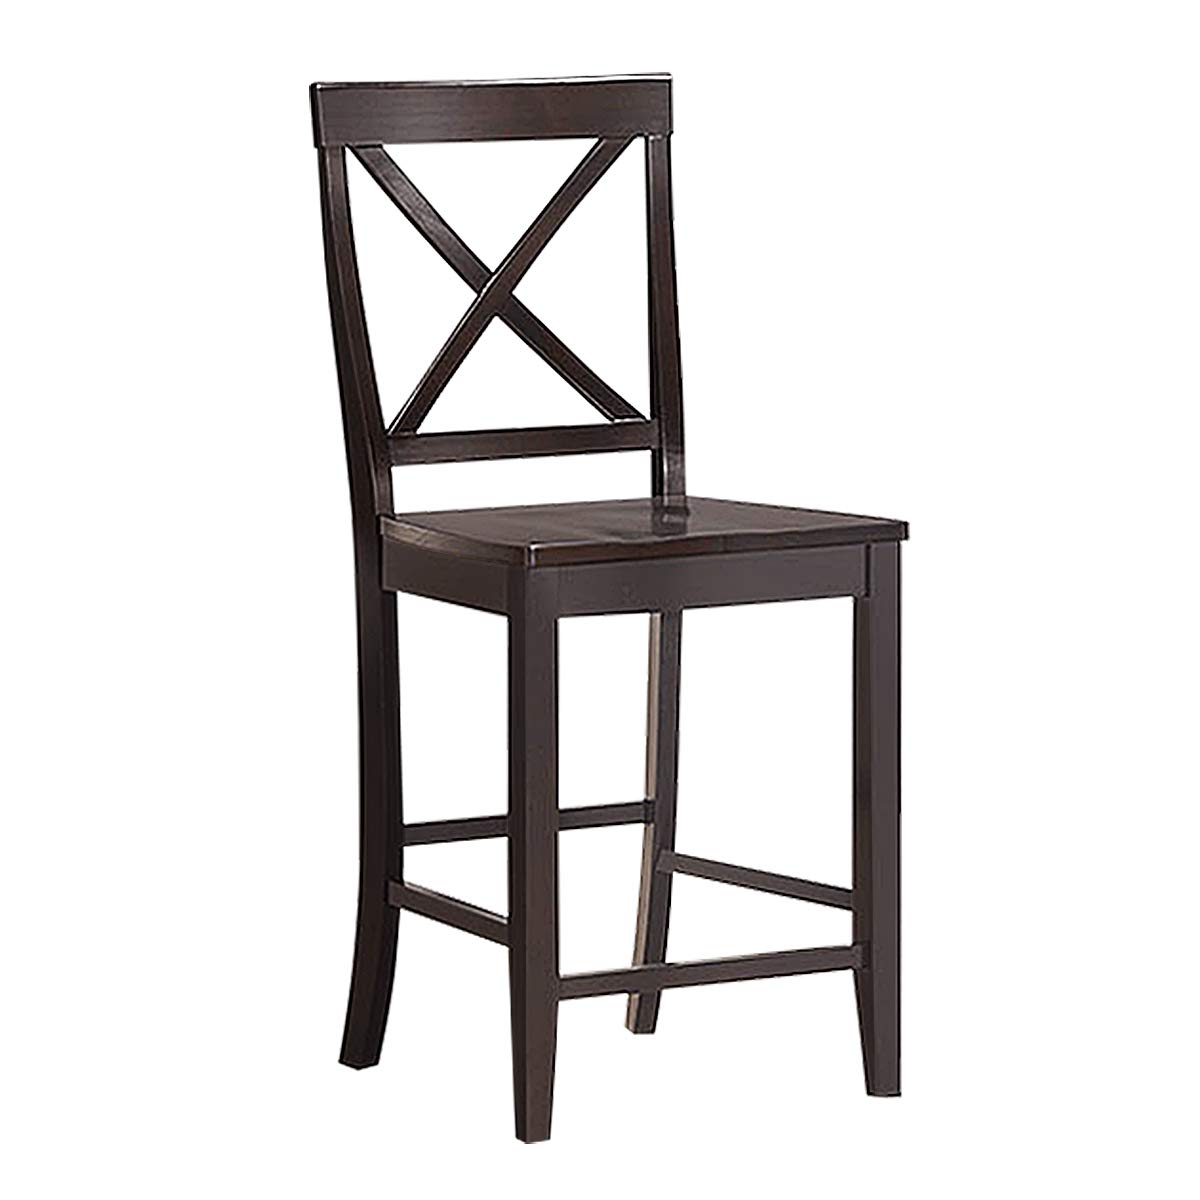 Giantex Dining Chairs, Counter Height Barstools, Rubber Wood Chairs (Expresso)